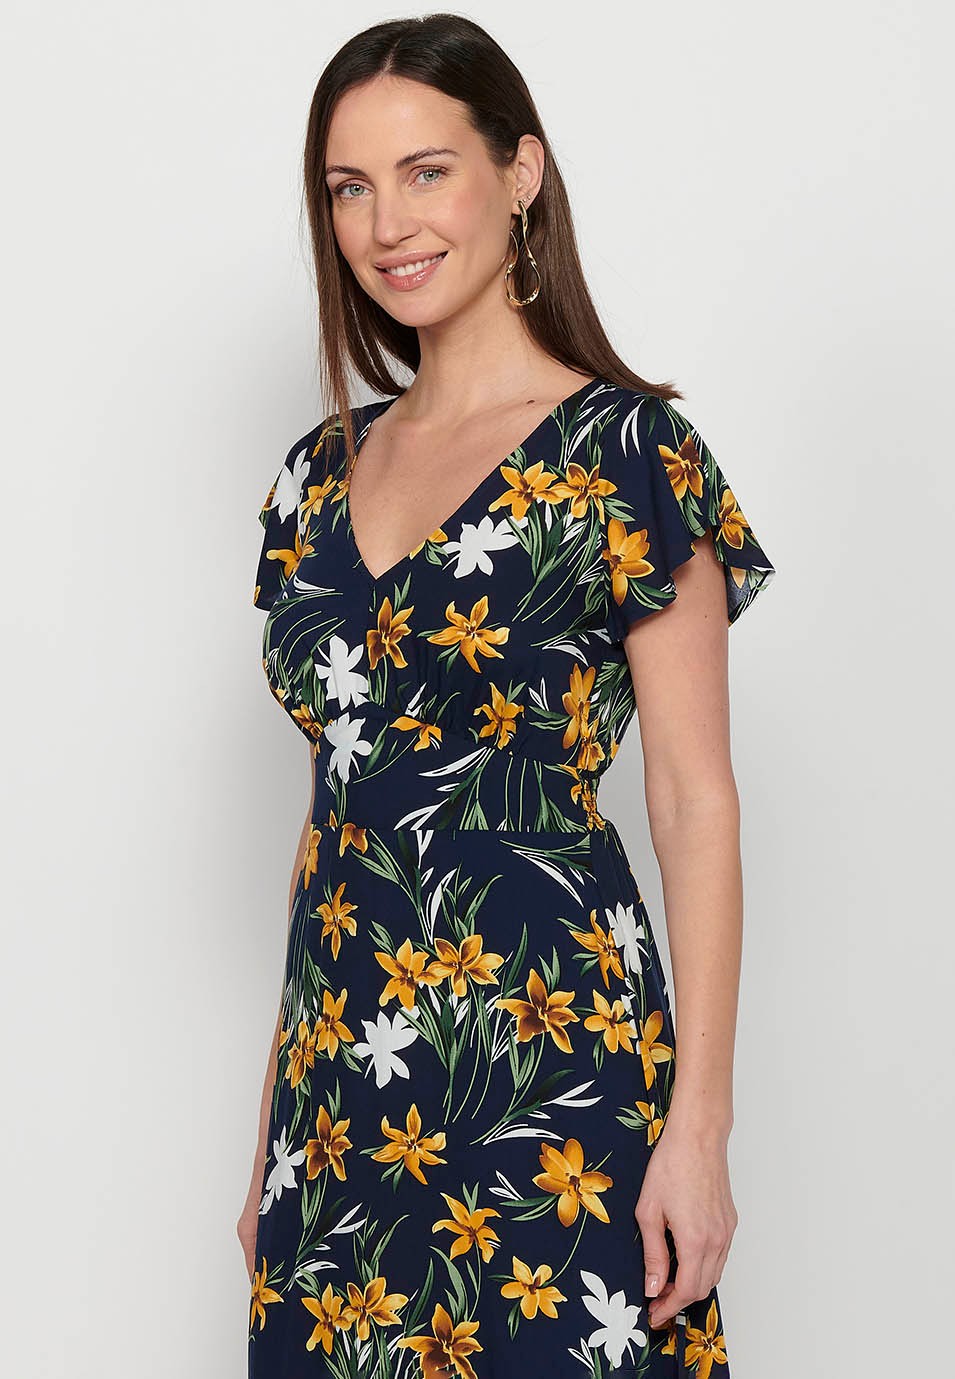 Long short-sleeved dress with V-neck and floral print in Navy for Women 1